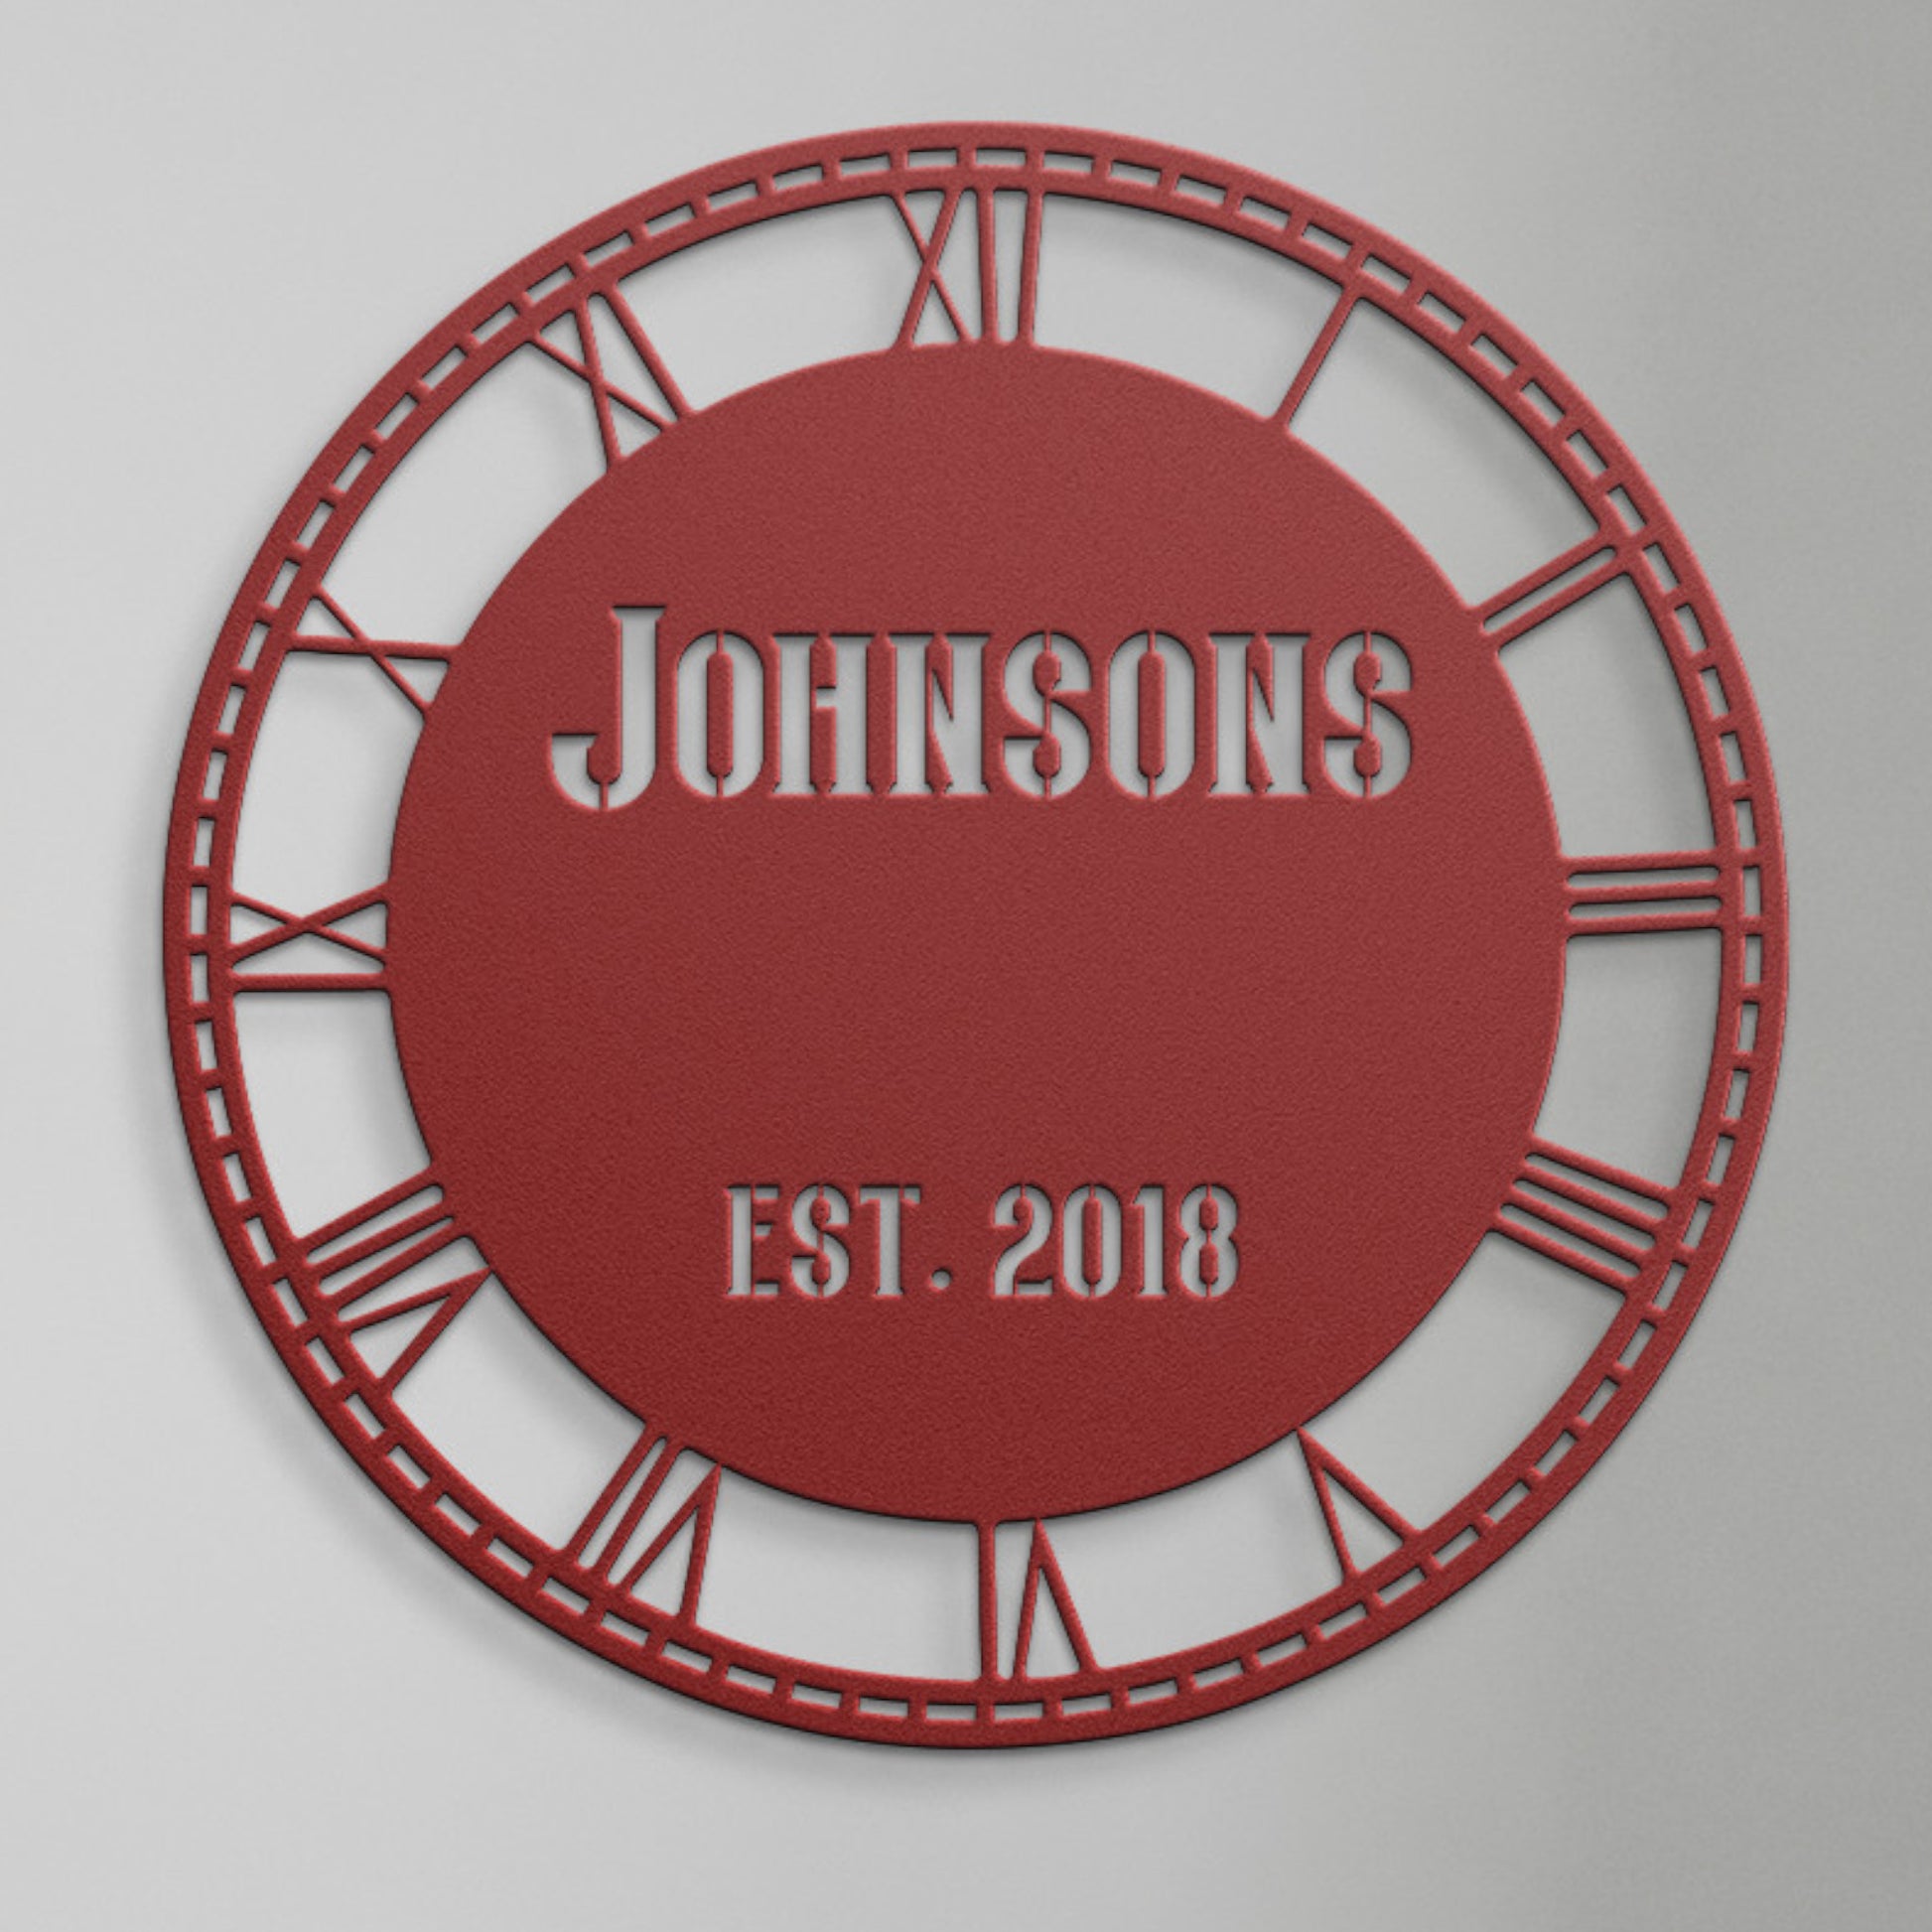 Personalized Wall Clock Metal Sign. Custom Family Name Decor Gift. Personal Roman Watch. Surname Wall Hanging. Est Year Housewarming Present